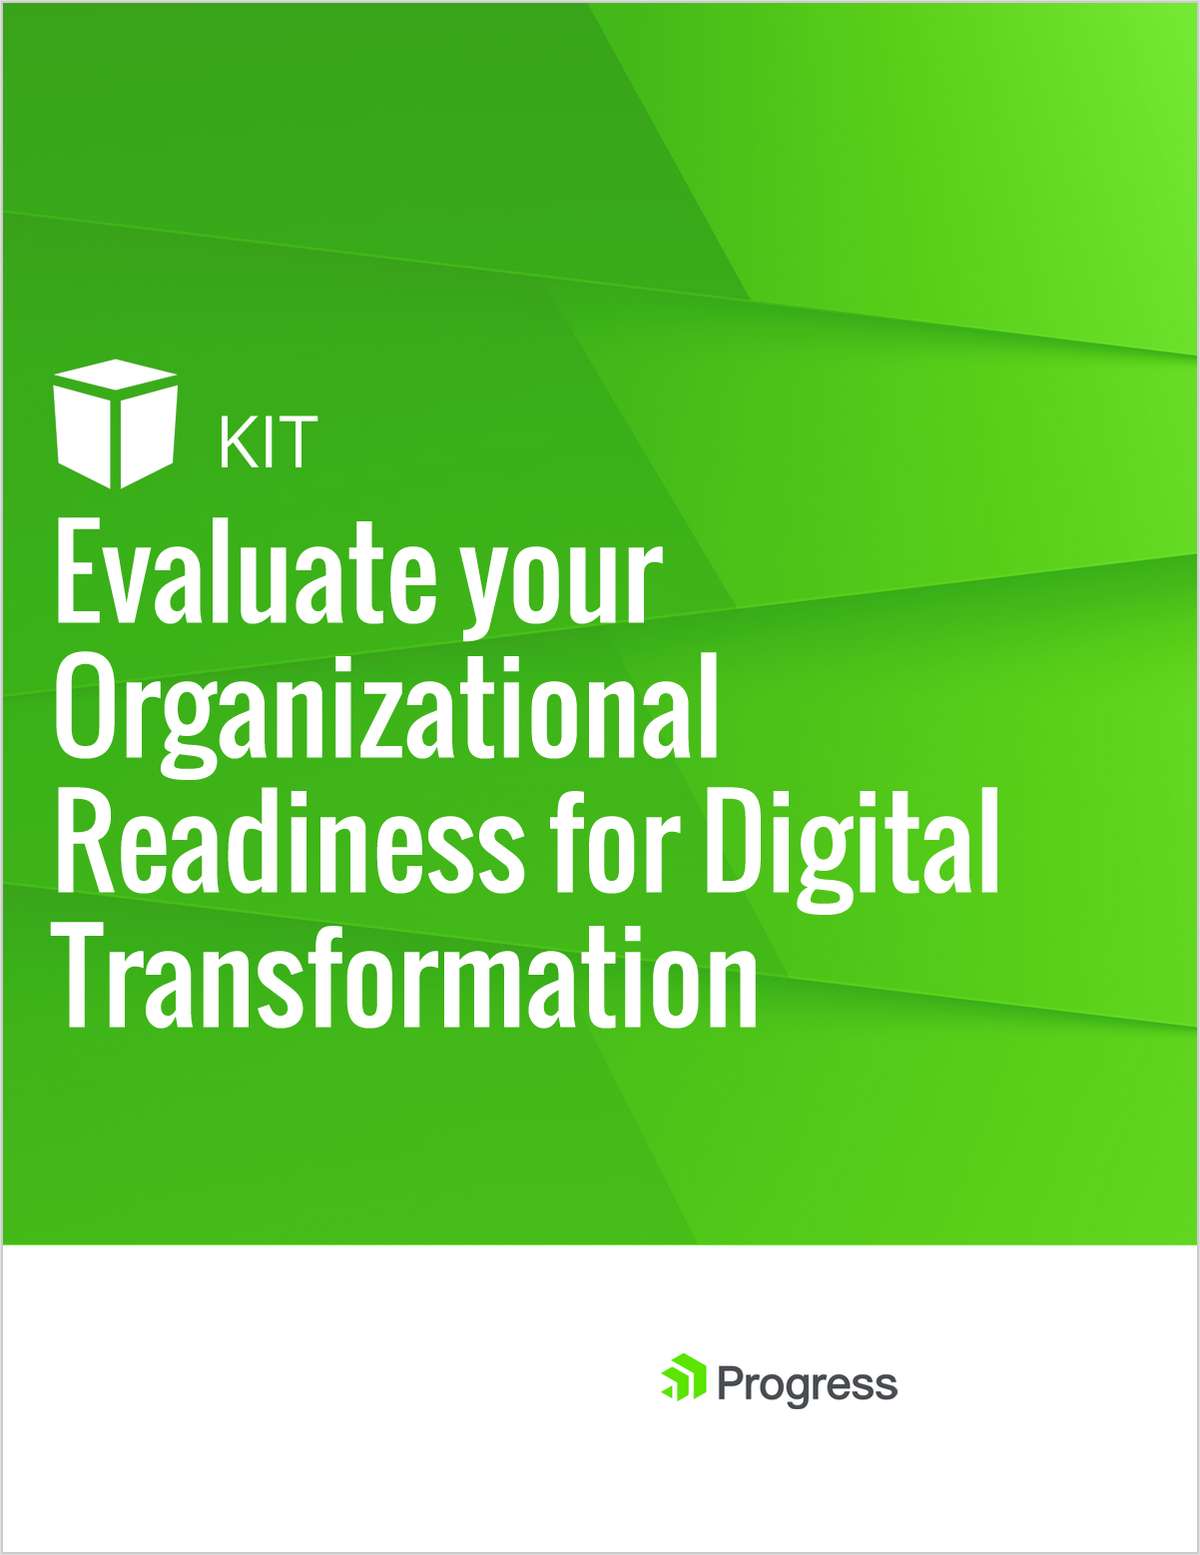 Evaluate your Organizational Readiness for Digital Transformation